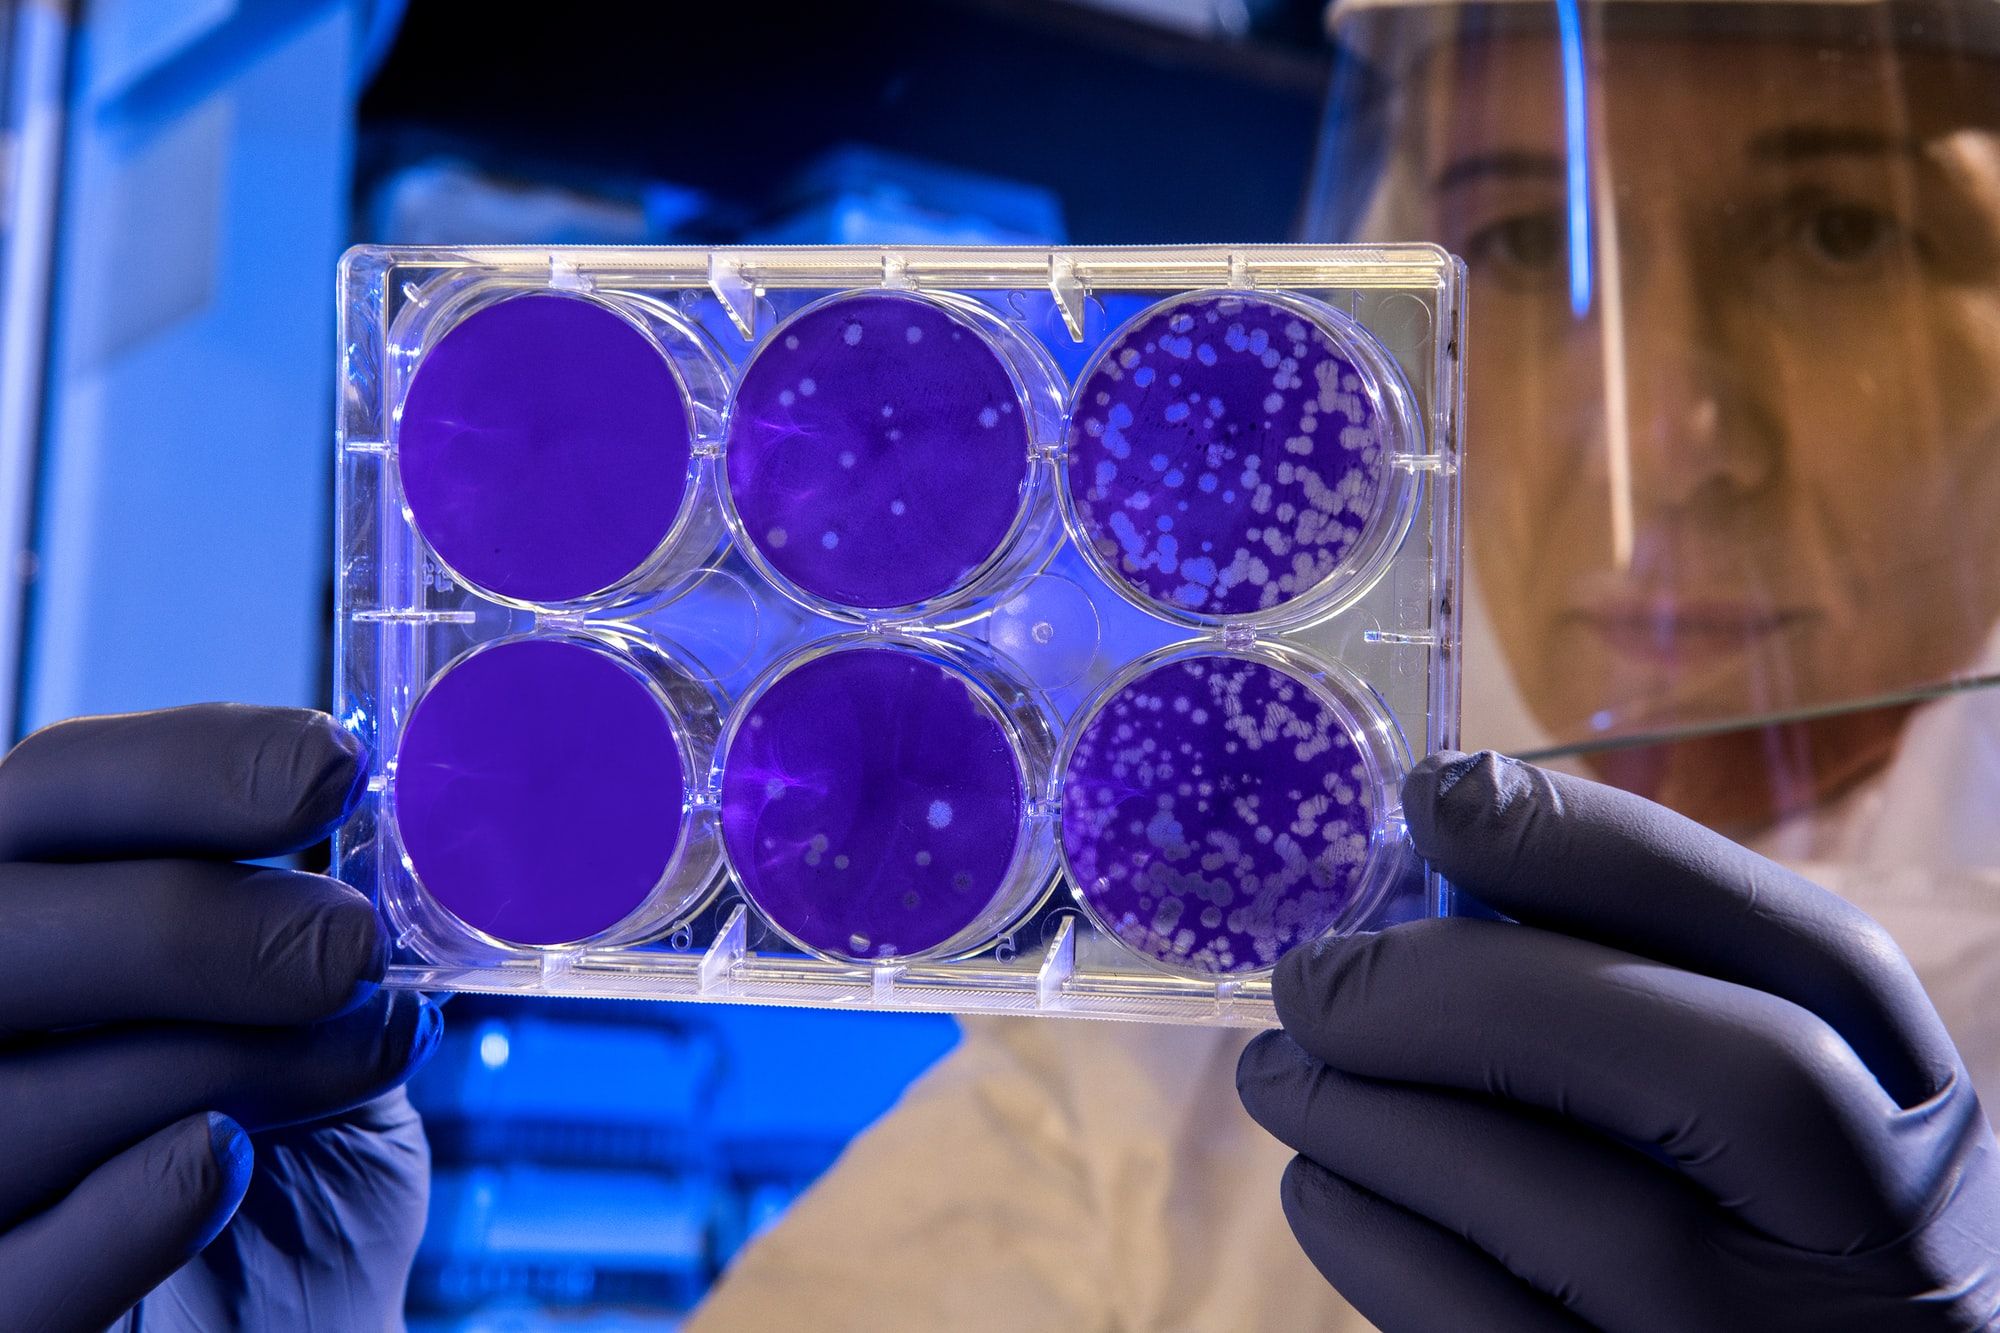 Scientist examines the result of a plaque assay, which is a test that allows scientists to count how many flu virus particles (virions) are in a mixture. To perform the test, scientists must first grow host cells that attach to the bottom of the plate, and then add viruses to each well so that the attached cells may be infected. After staining the uninfected cells purple, the scientist can count the clear spots on the plate, each representing a single virus particle.